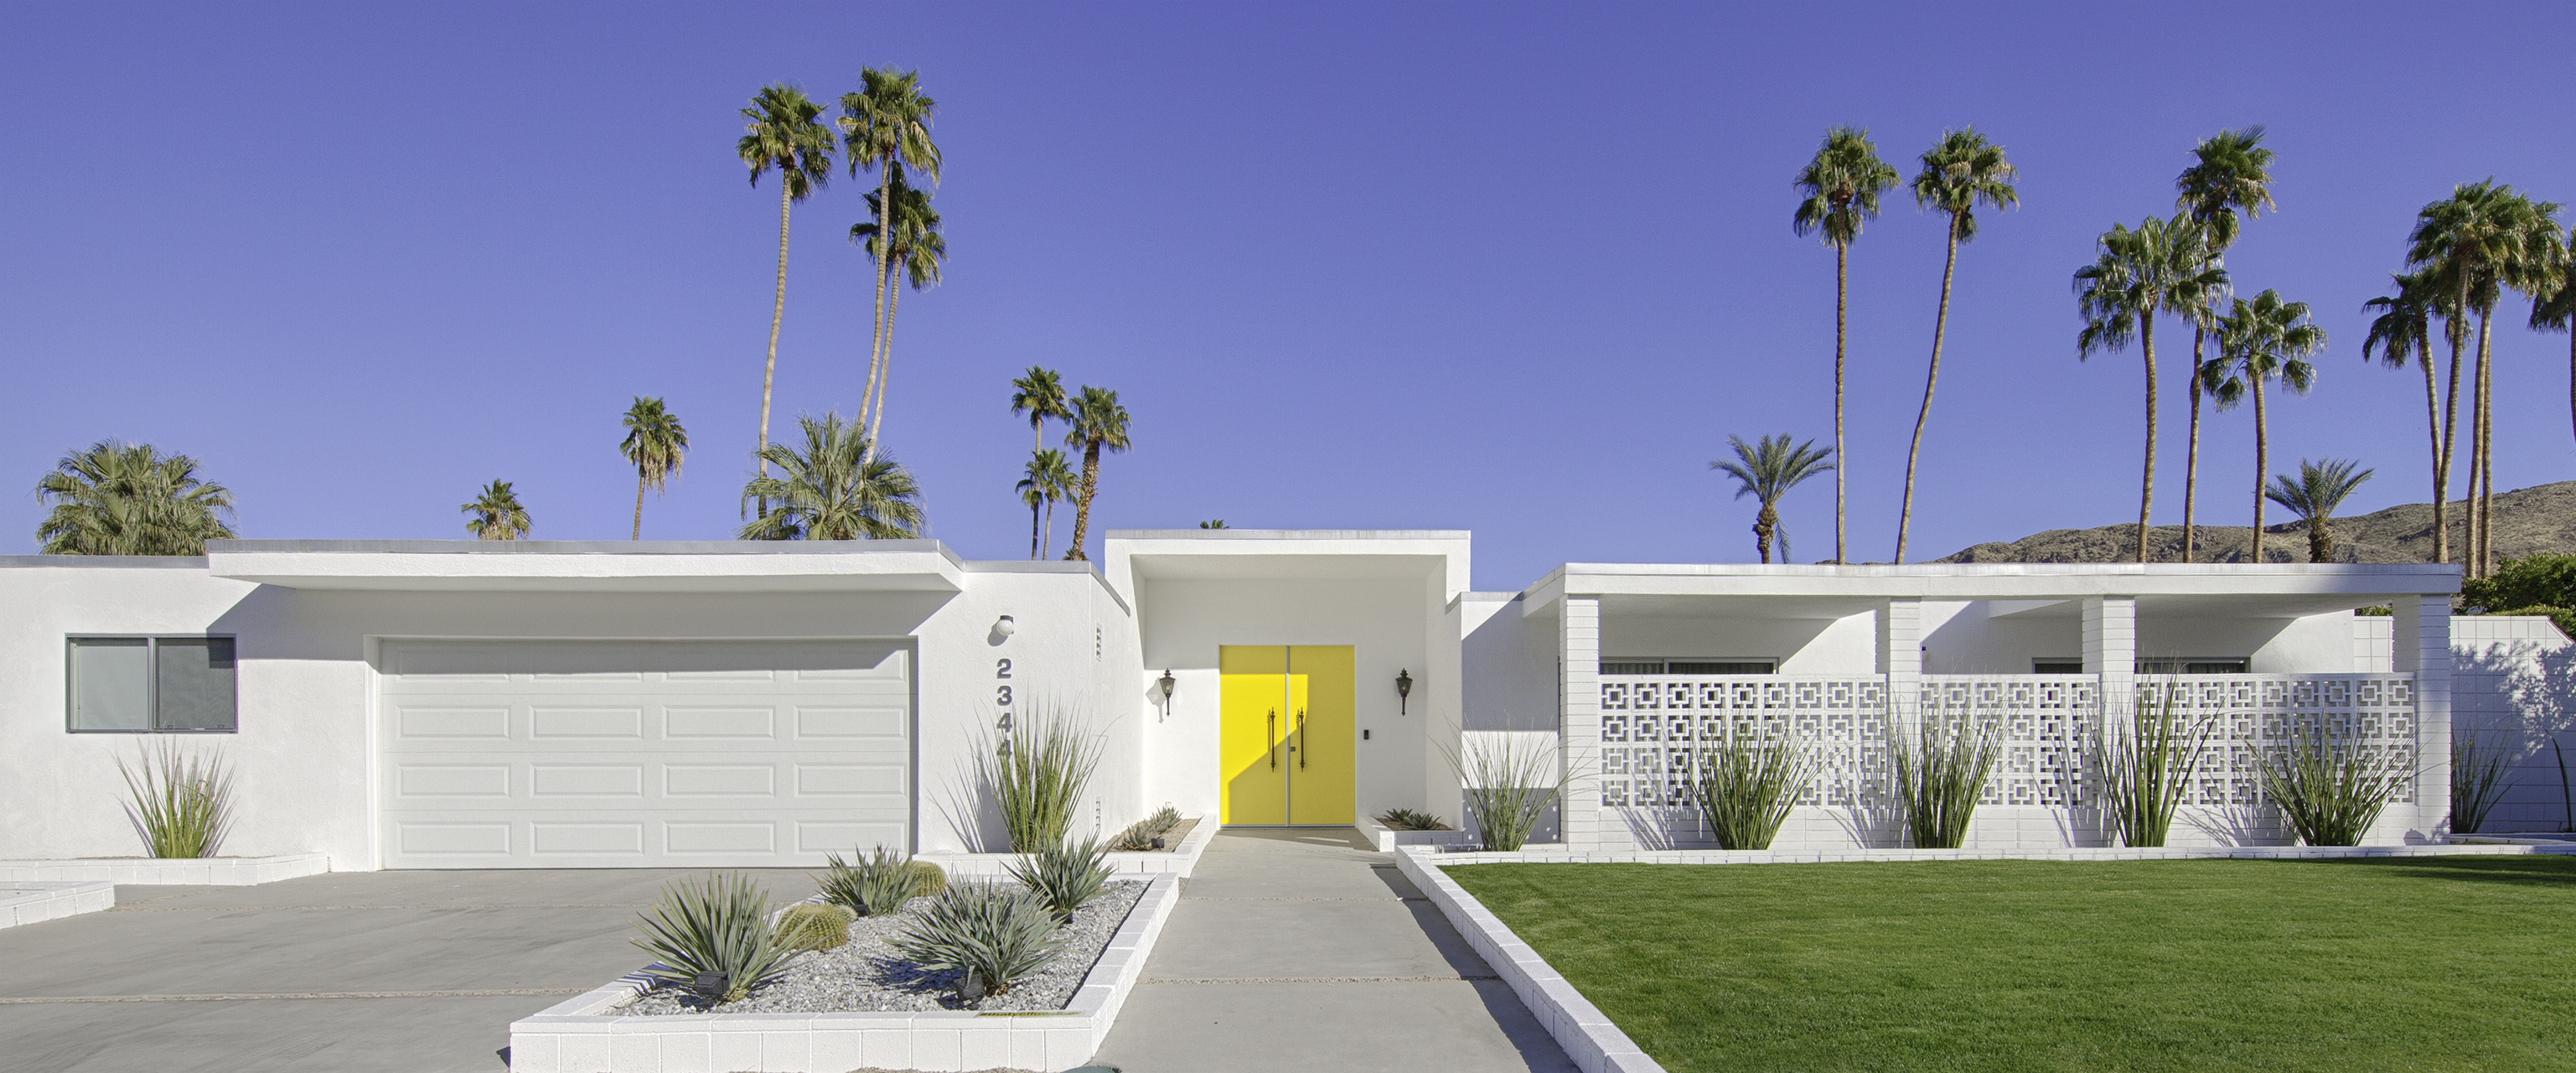 palm springs homes for sale, coachella valley homes for sale, high desert homes for sale